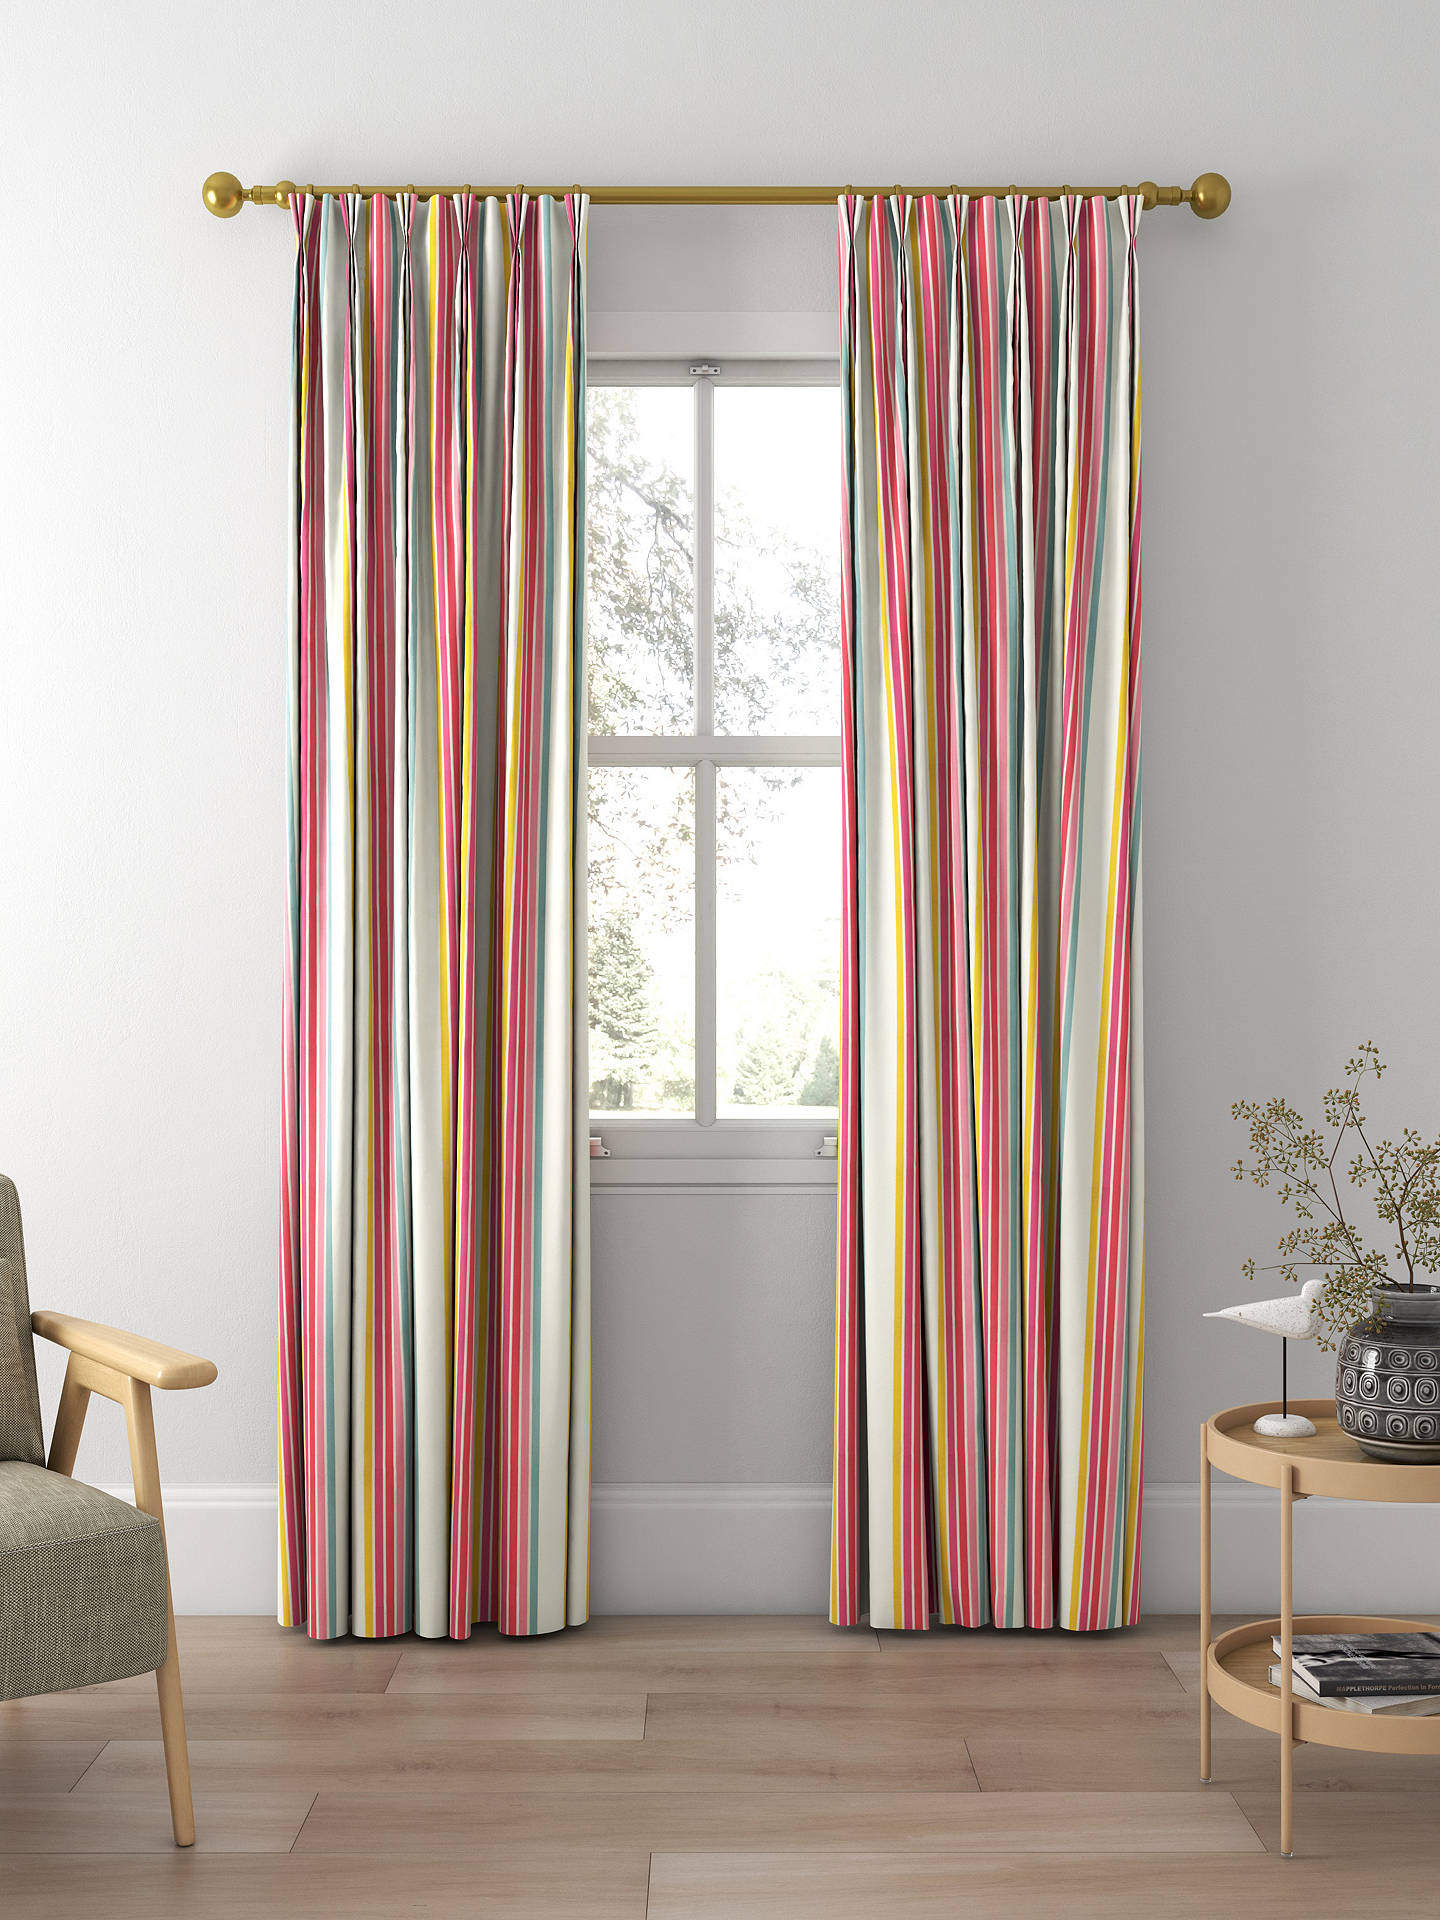 Harlequin Helter Skelter Stripe Made to Measure Curtains and Roman Blind, Cherry/Blossom